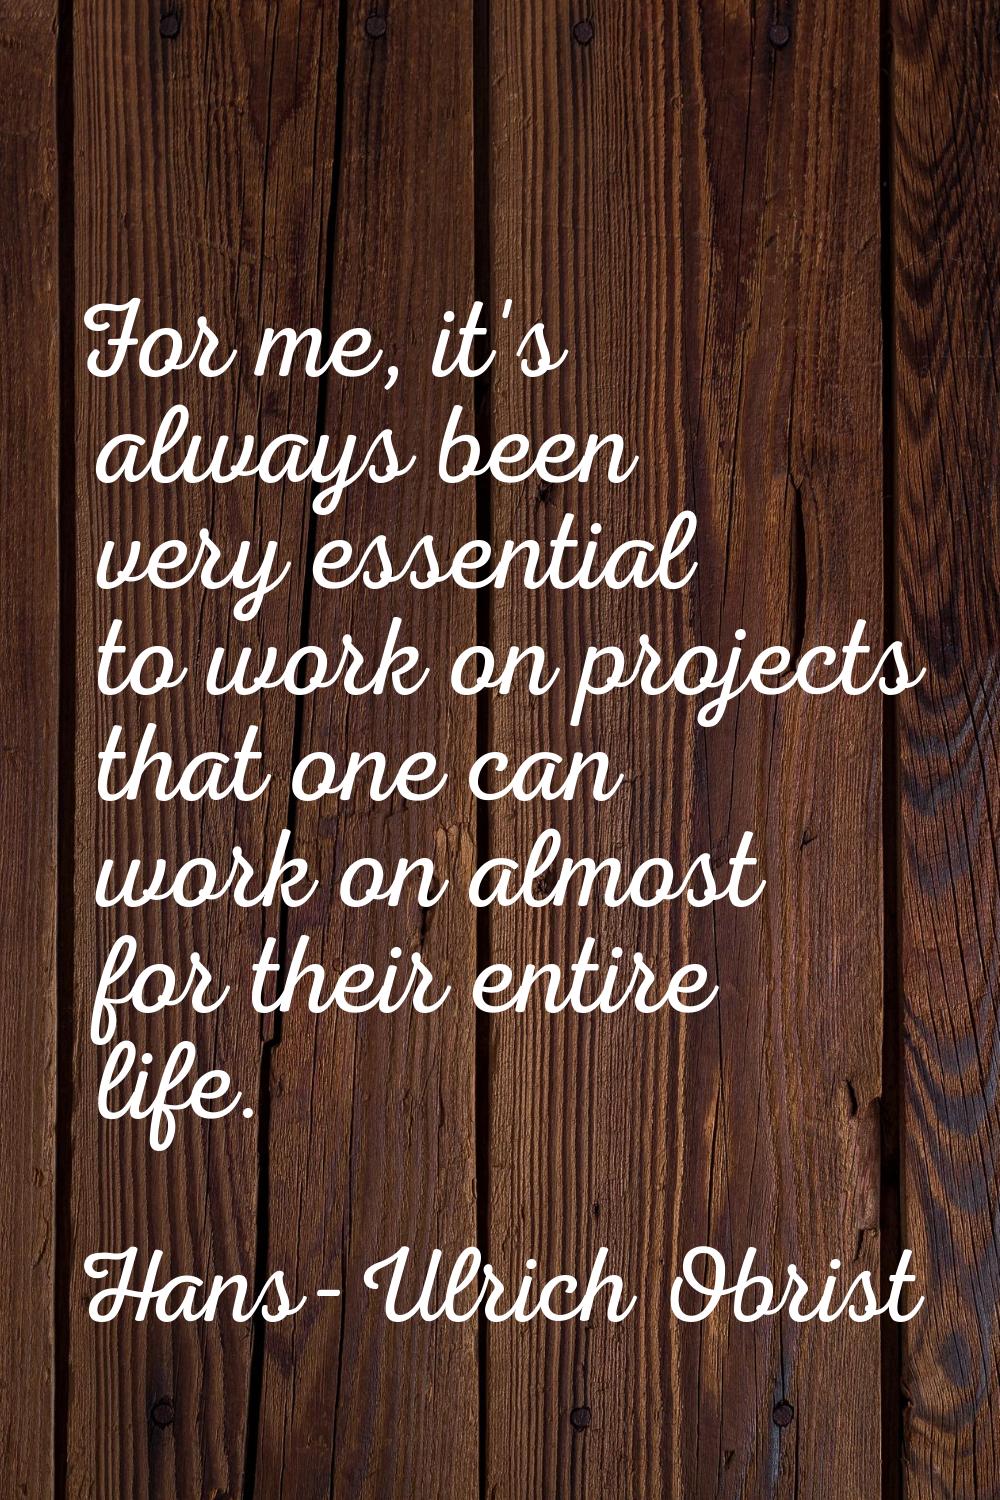 For me, it's always been very essential to work on projects that one can work on almost for their e